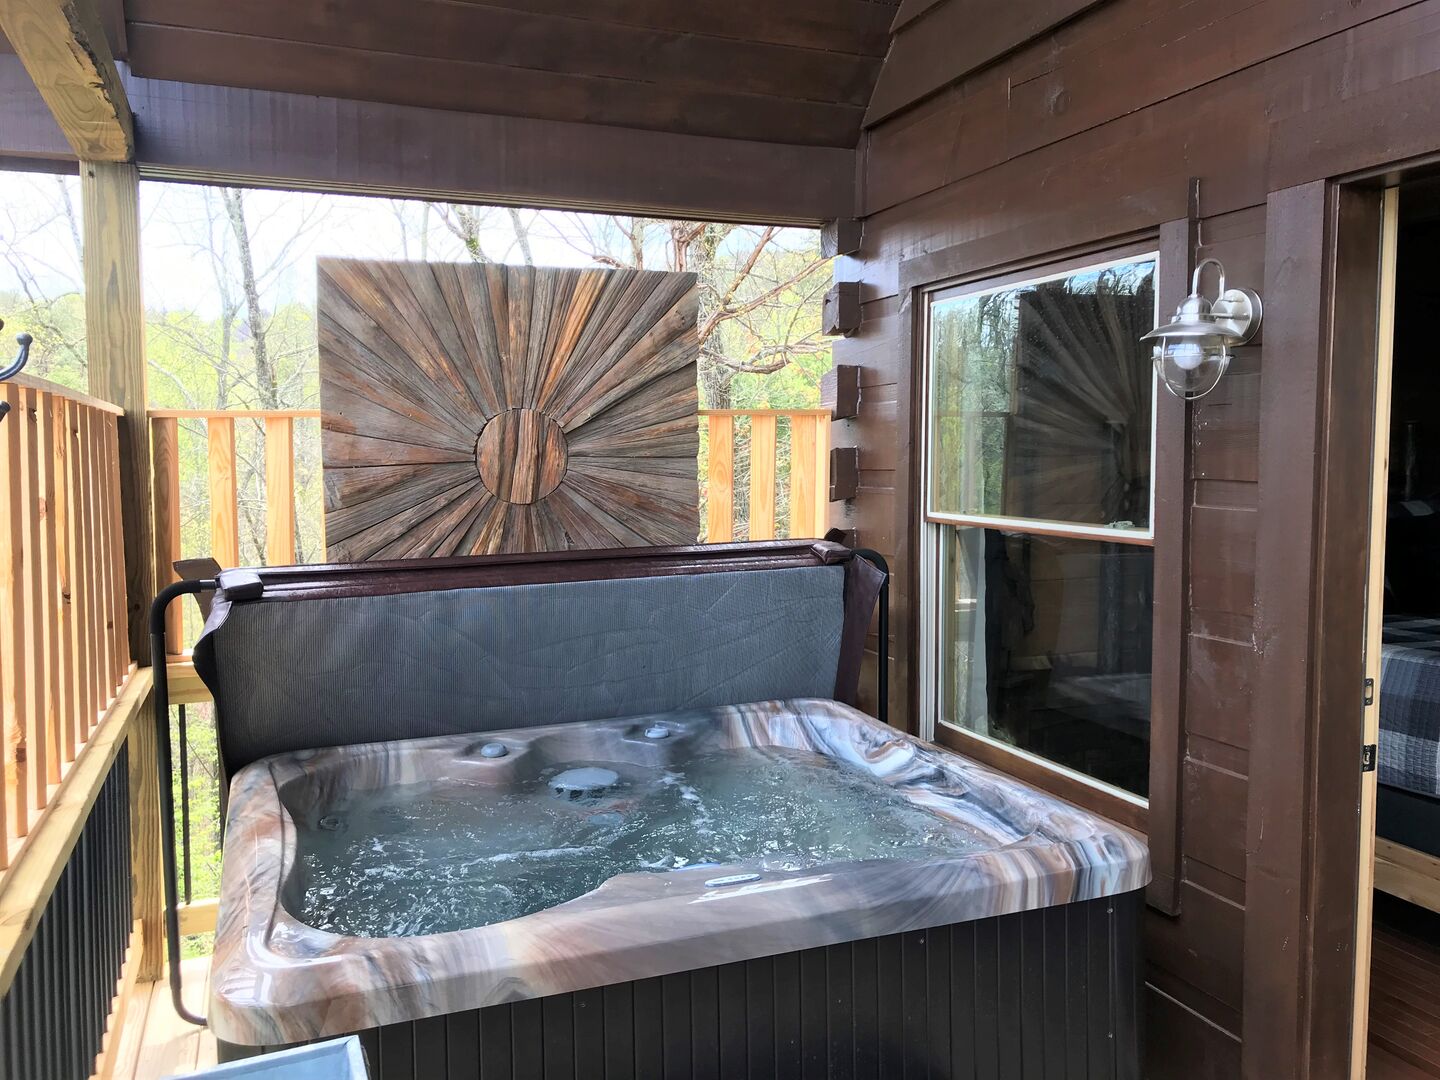 Enjoy the hot tub after a day in the Smokies.